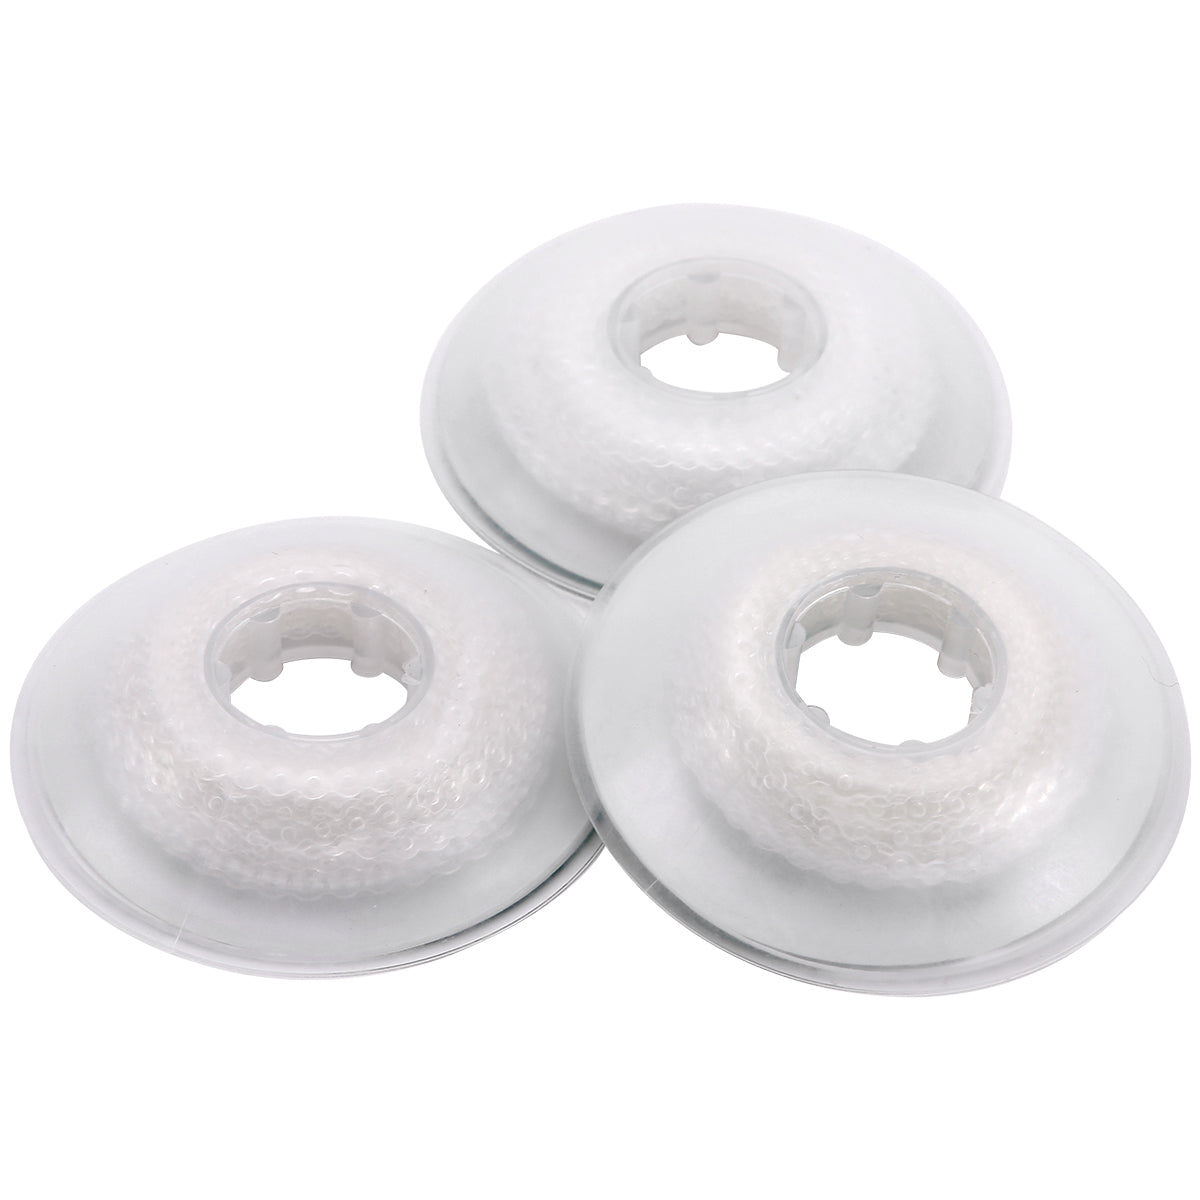 TAAKSHII WHITE BIG RUBBER BAND SET OF 6 Rubber Band Price in India - Buy  TAAKSHII WHITE BIG RUBBER BAND SET OF 6 Rubber Band online at